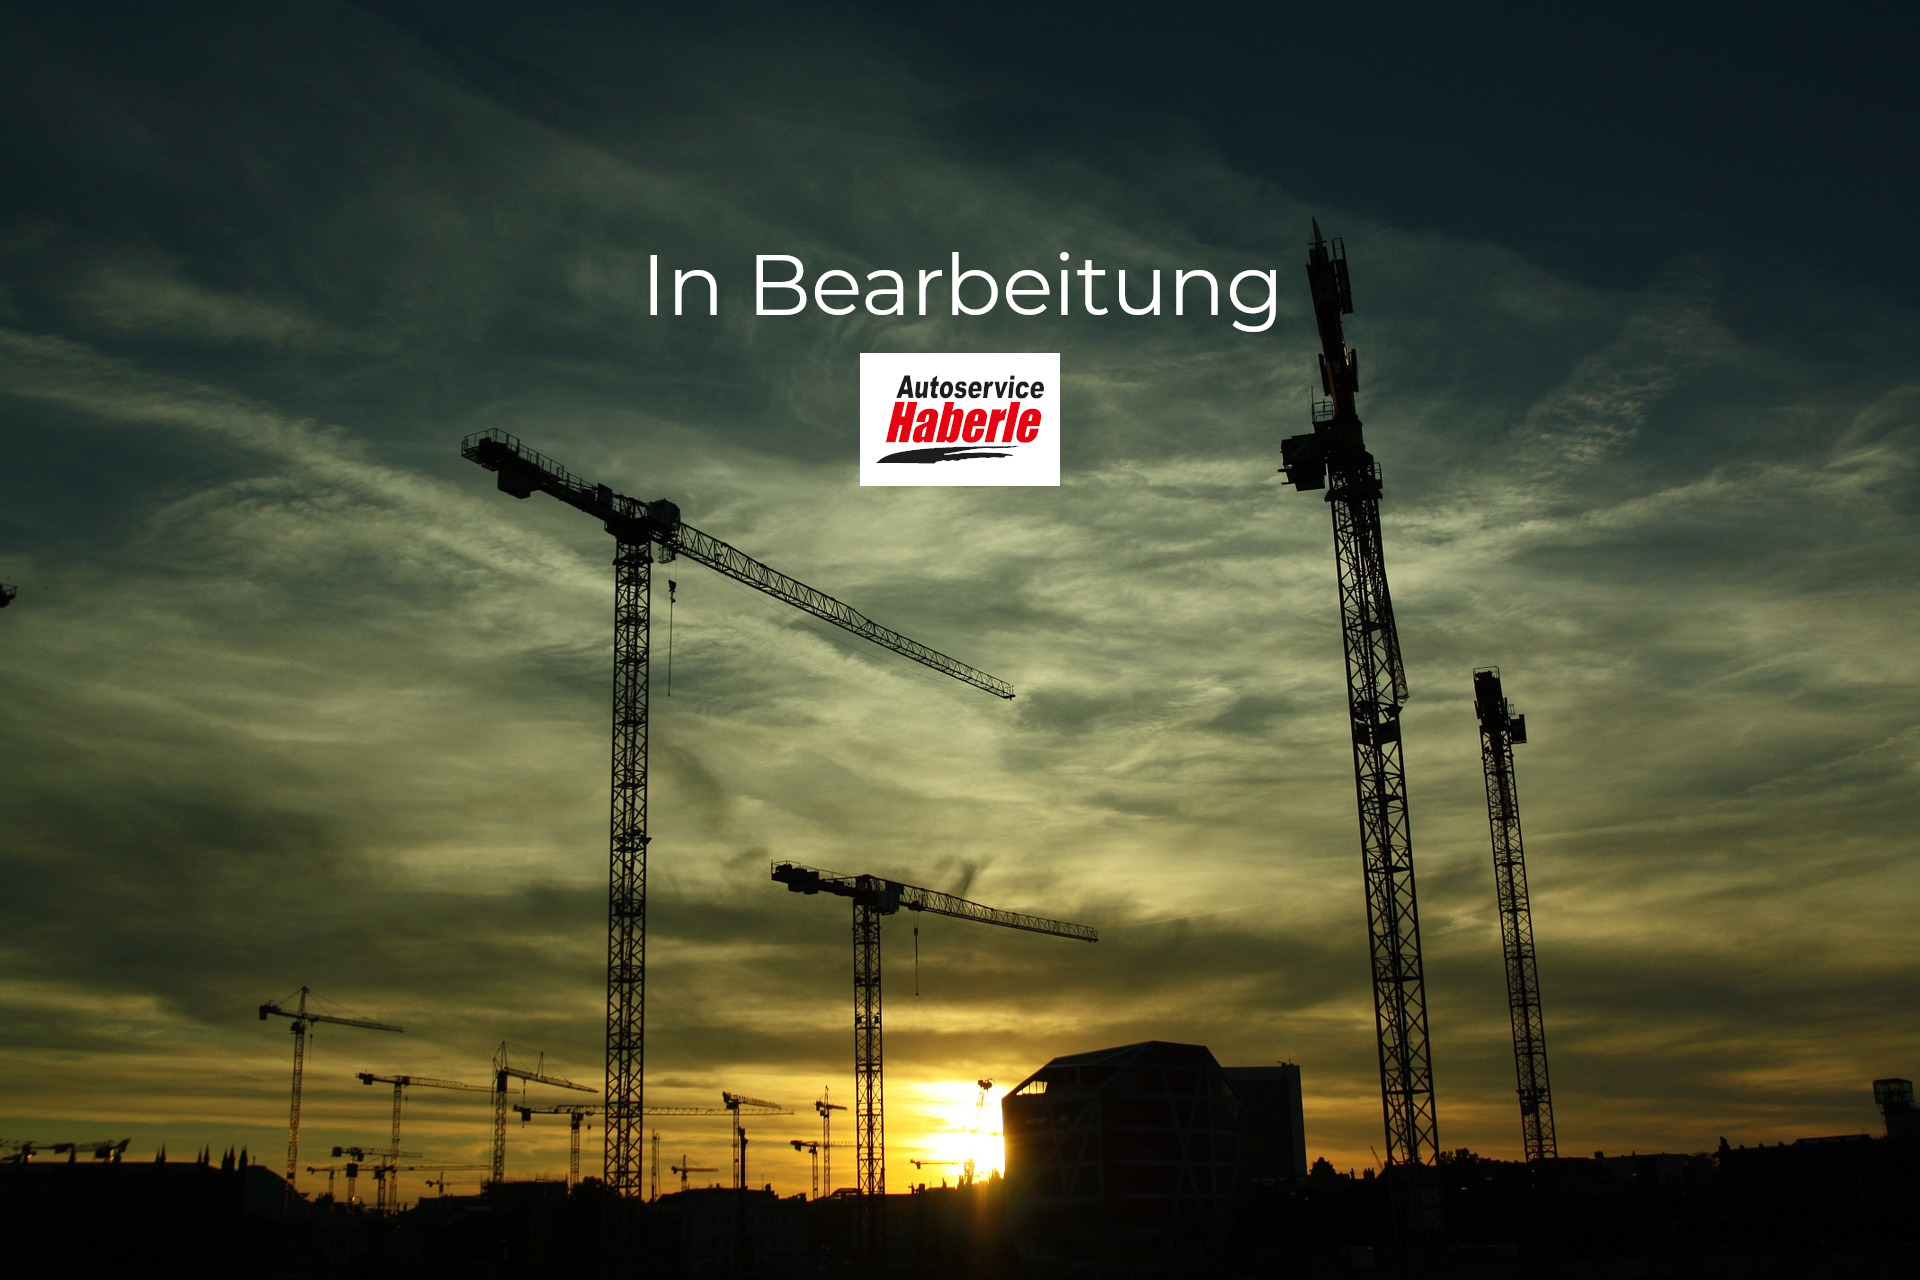 construction in Bearbeitung